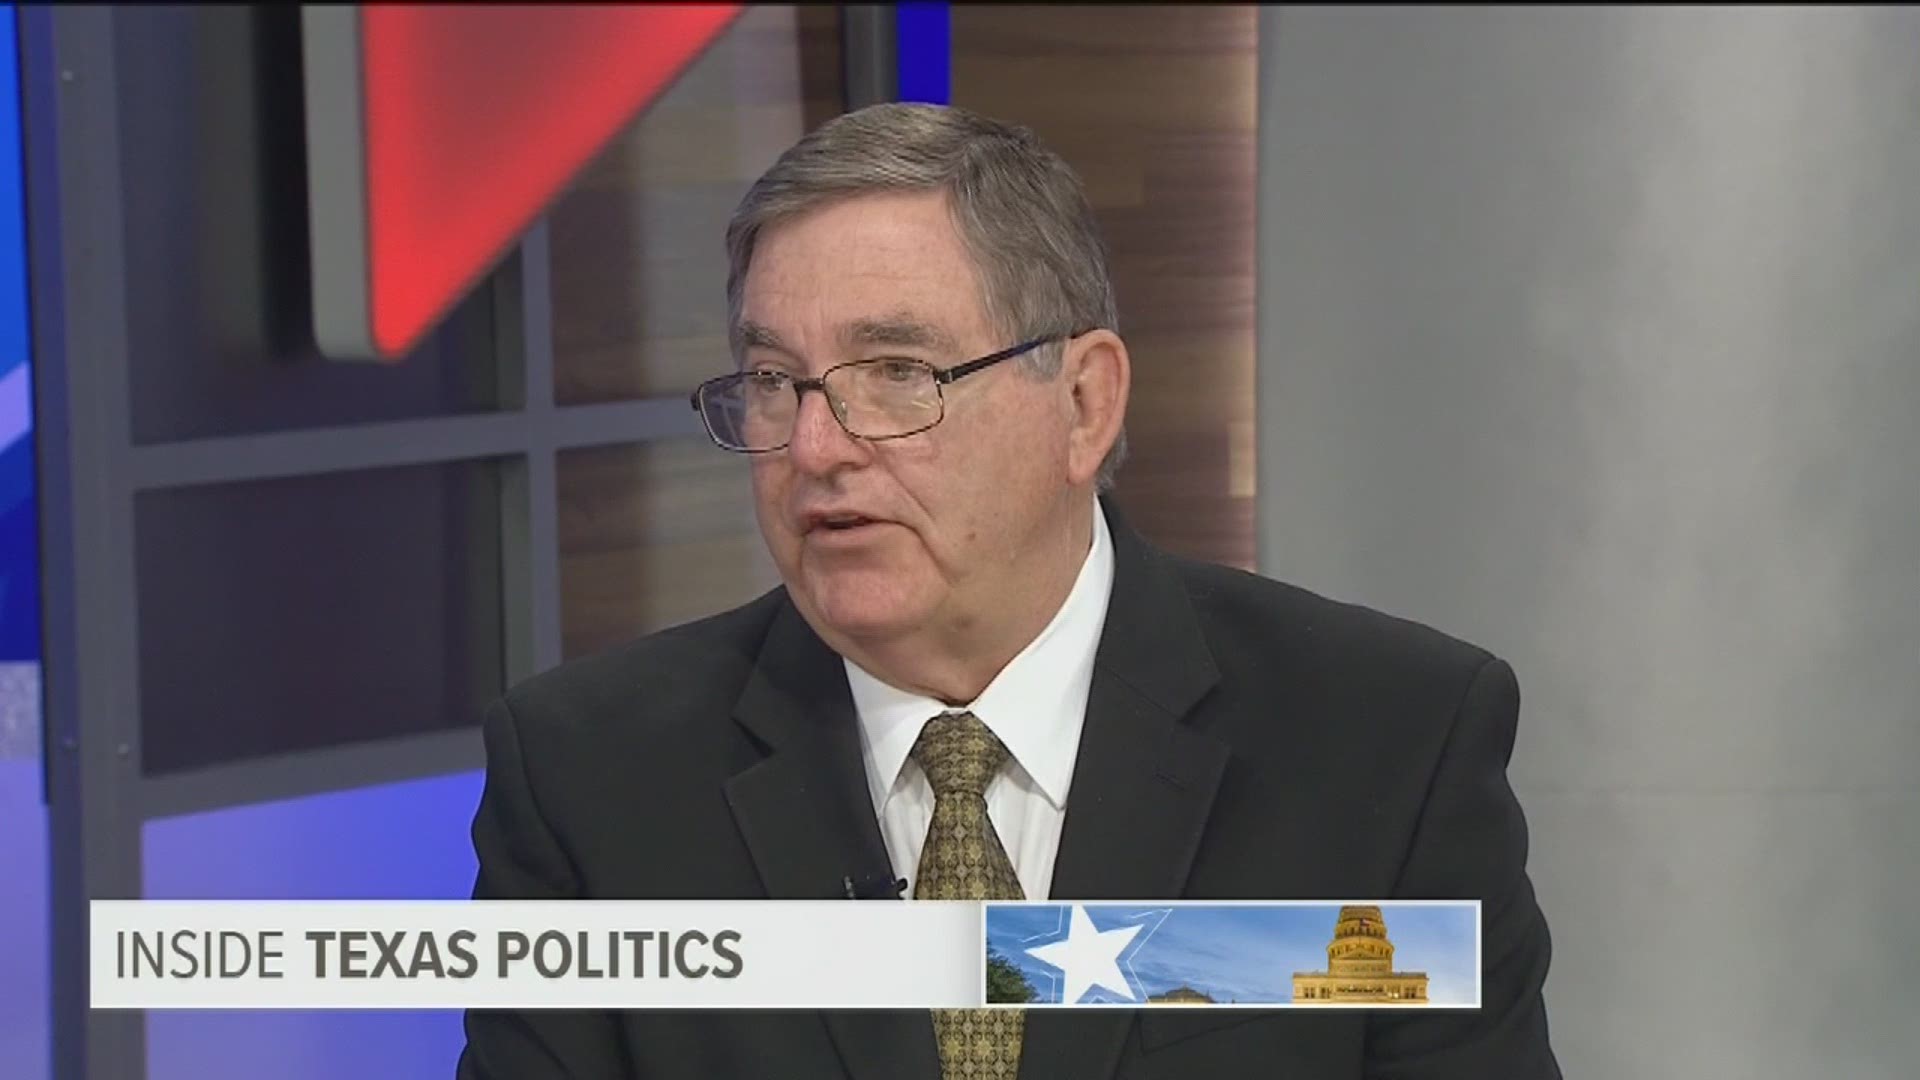 Inside Texas Politics began with the scrutiny underway of Ivanka Trump and Jared Kushner for the use of private emails and WhatsApp for official White House business. U.S. Representative Michael Burgess discusses whether a special prosecutor should be appointed to investigate the two White House advisors.